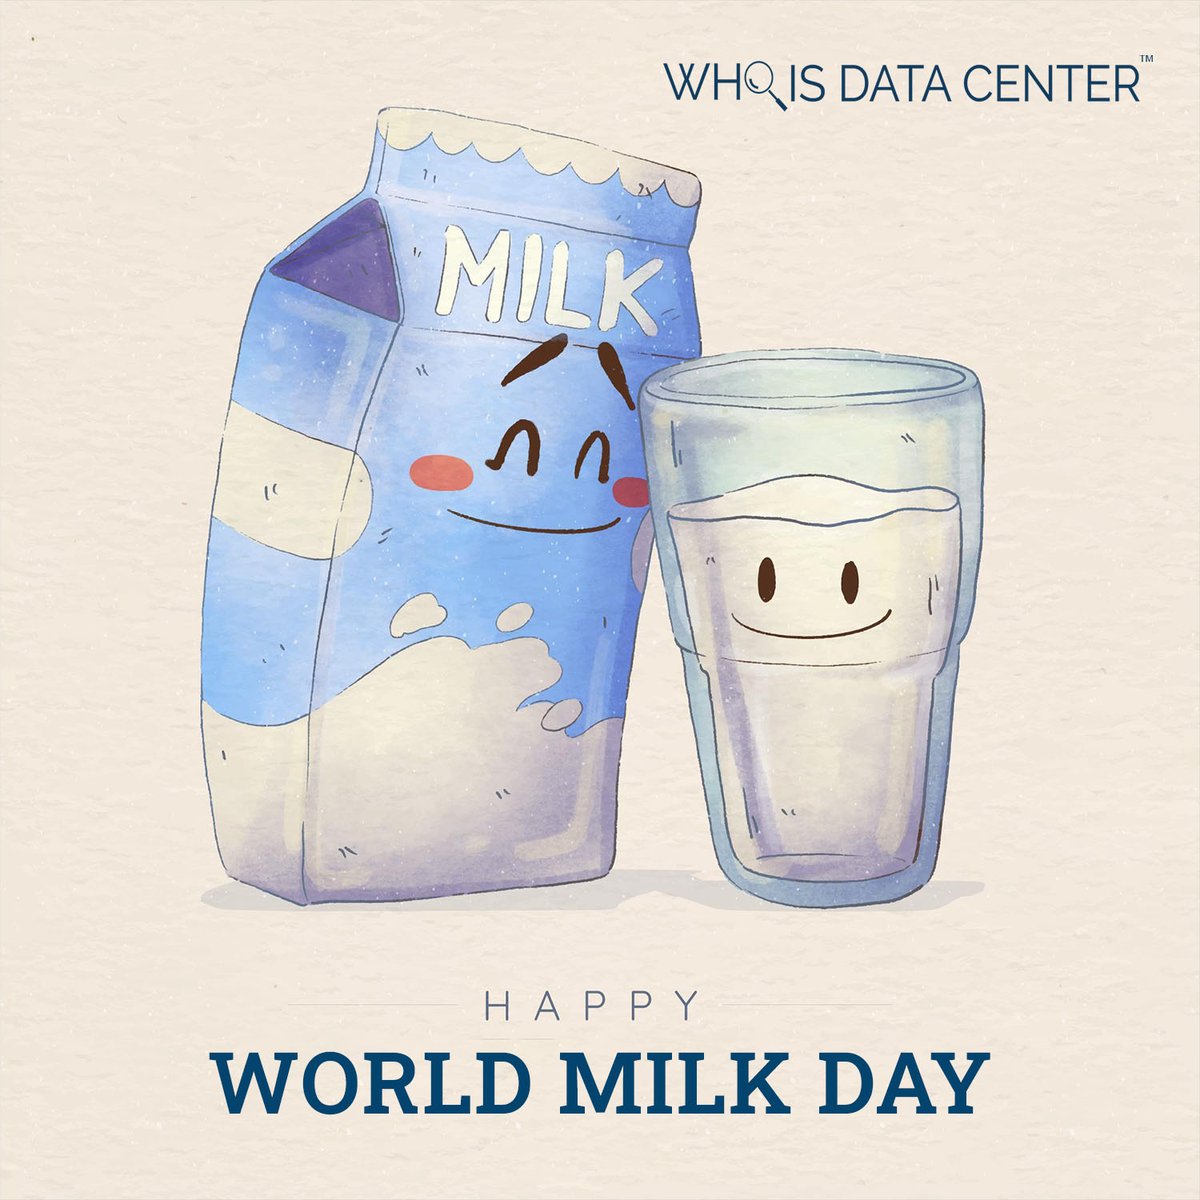 We may not realize it but milk makes an important part of our lives and health. Warm wishes on World Milk Day to all.
.
.
#worldmilkday #milk #strong #milknutrition #nutrition #health #milkbenefits #nourishment #stayfit #staystrong